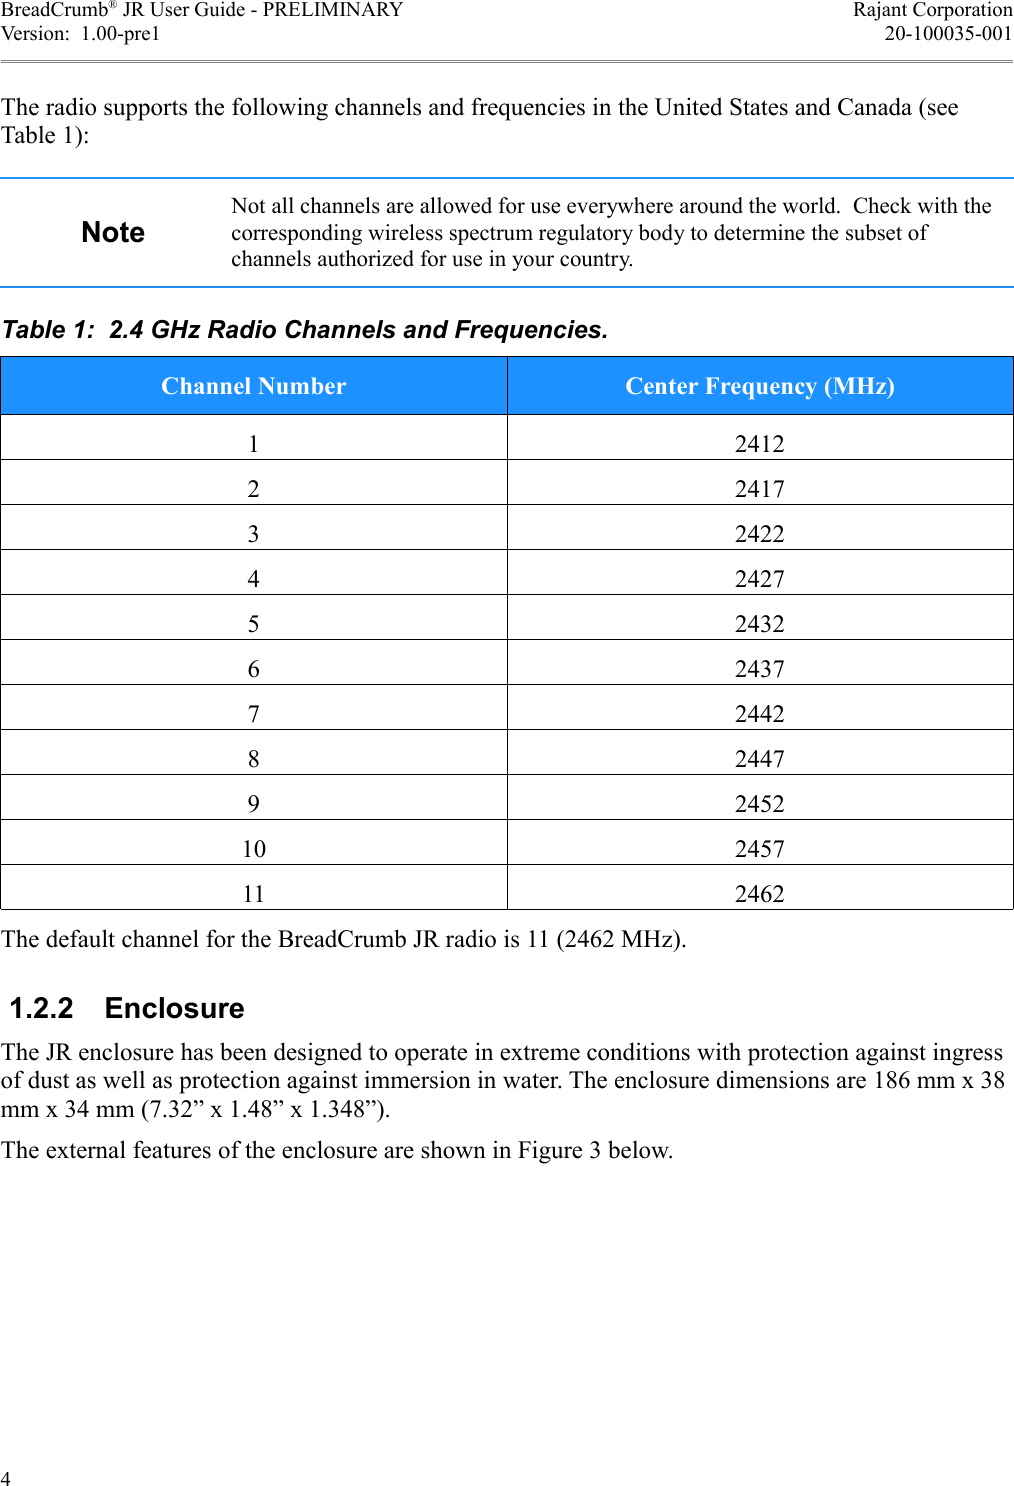 BreadCrumb® JR User Guide - PRELIMINARY Rajant CorporationVersion:  1.00-pre1 20-100035-001The radio supports the following channels and frequencies in the United States and Canada (see Table 1):Not all channels are allowed for use everywhere around the world.  Check with the corresponding wireless spectrum regulatory body to determine the subset of channels authorized for use in your country.Table 1:  2.4 GHz Radio Channels and Frequencies.Channel Number Center Frequency (MHz)124122241732422424275243262437724428244792452102457112462The default channel for the BreadCrumb JR radio is 11 (2462 MHz).,*-*- )&apos;The JR enclosure has been designed to operate in extreme conditions with protection against ingress of dust as well as protection against immersion in water. The enclosure dimensions are 186 mm x 38 mm x 34 mm (7.32” x 1.48” x 1.348”).The external features of the enclosure are shown in Figure 3 below.4